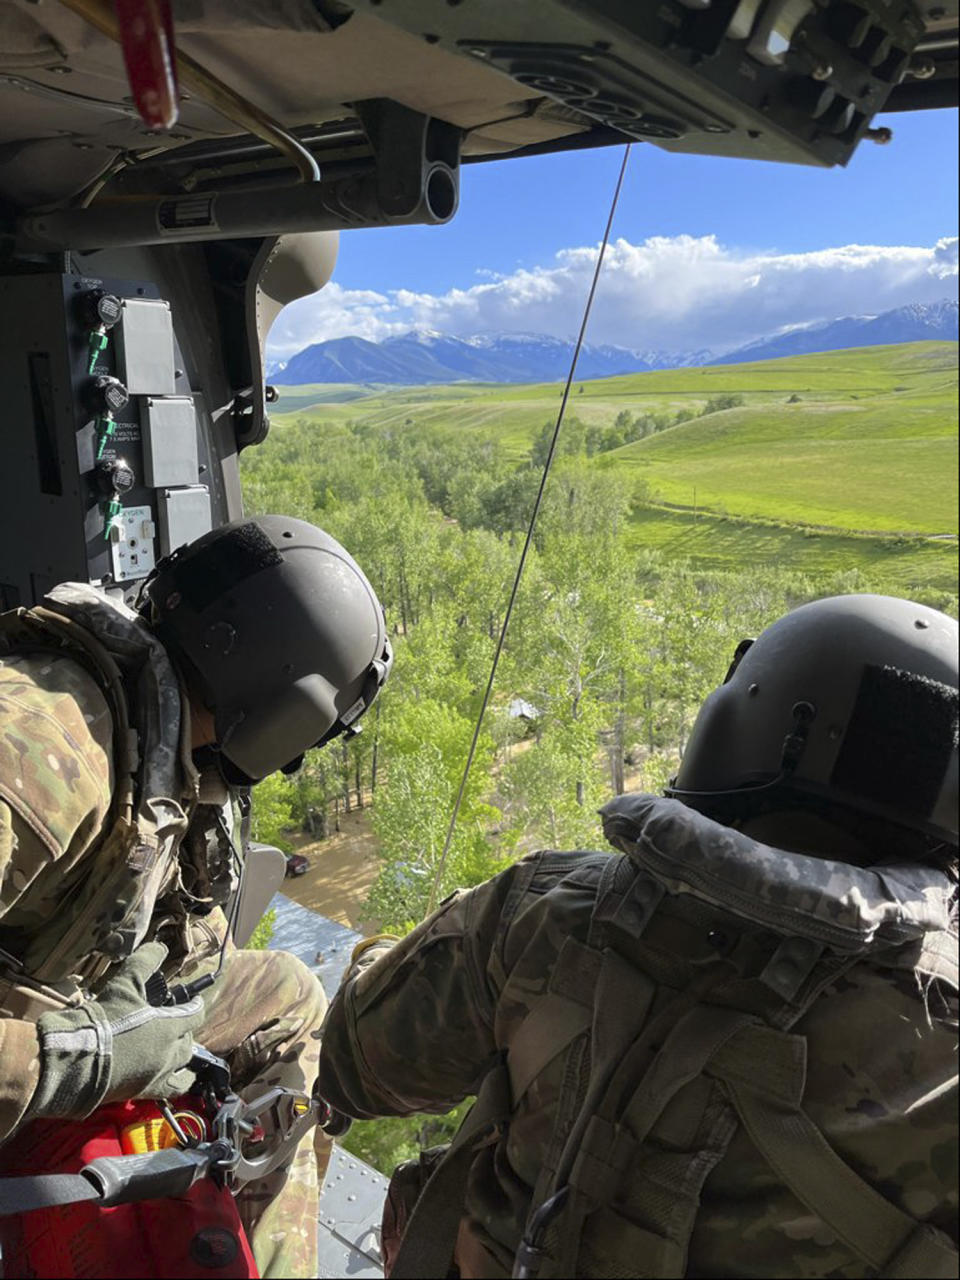 RETRANSMISSION TO CORRECT DAY AND DATE TO TUESDAY, JUNE 14 - In this photo released by the Montana National Guard, helicopter crew members are seen supporting search and rescue operations near Yellowstone National Park, Tuesday, June 14, 2022. Floodwaters that rushed through Yellowstone National Park and surrounding communities earlier this week are moving through Montana's largest city, flooding farms and ranches and forcing the shutdown of its water treatment plant. (Montana National Guard via AP)